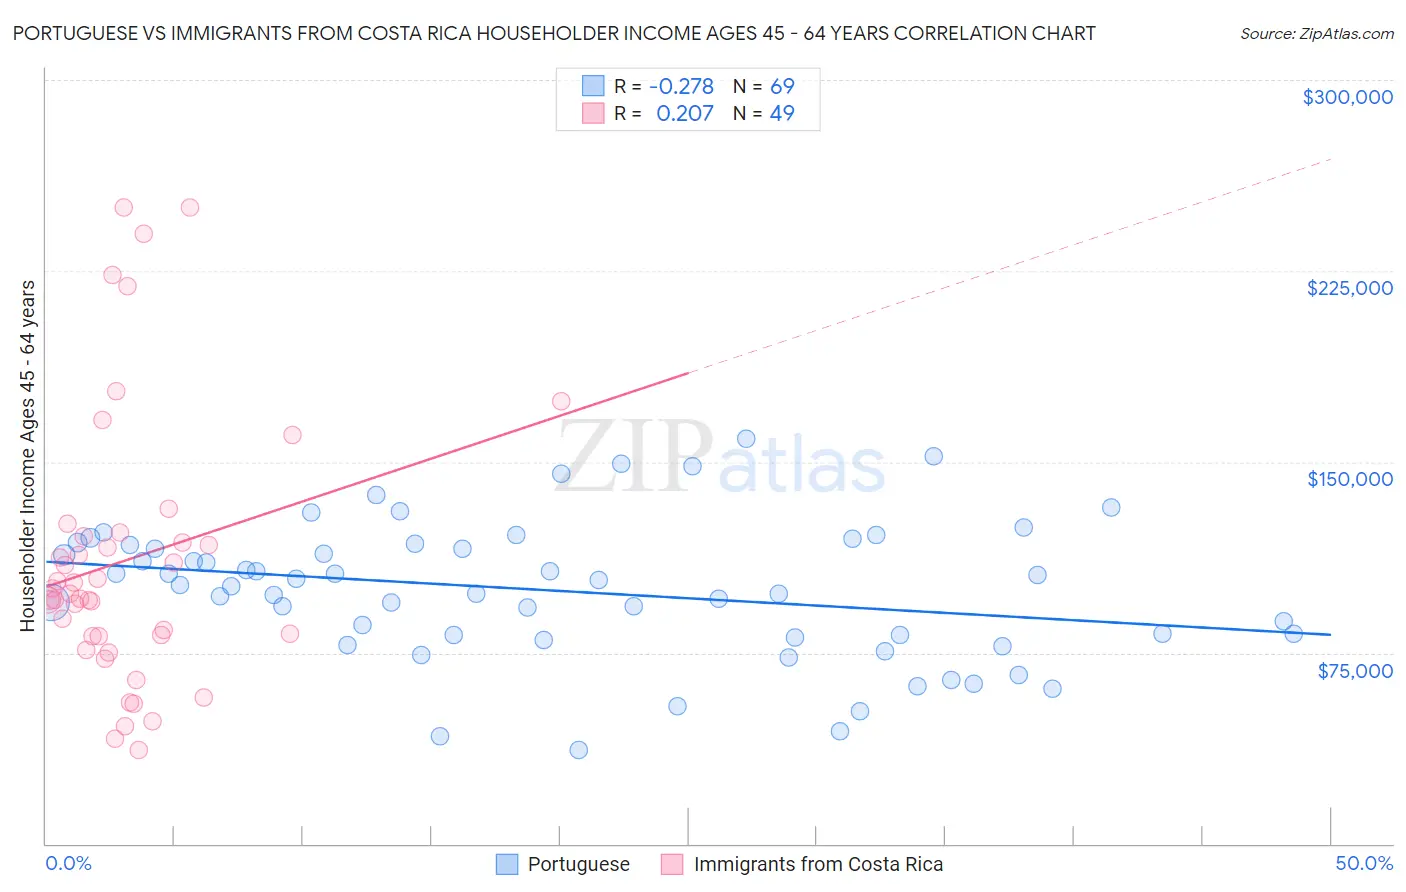 Portuguese vs Immigrants from Costa Rica Householder Income Ages 45 - 64 years